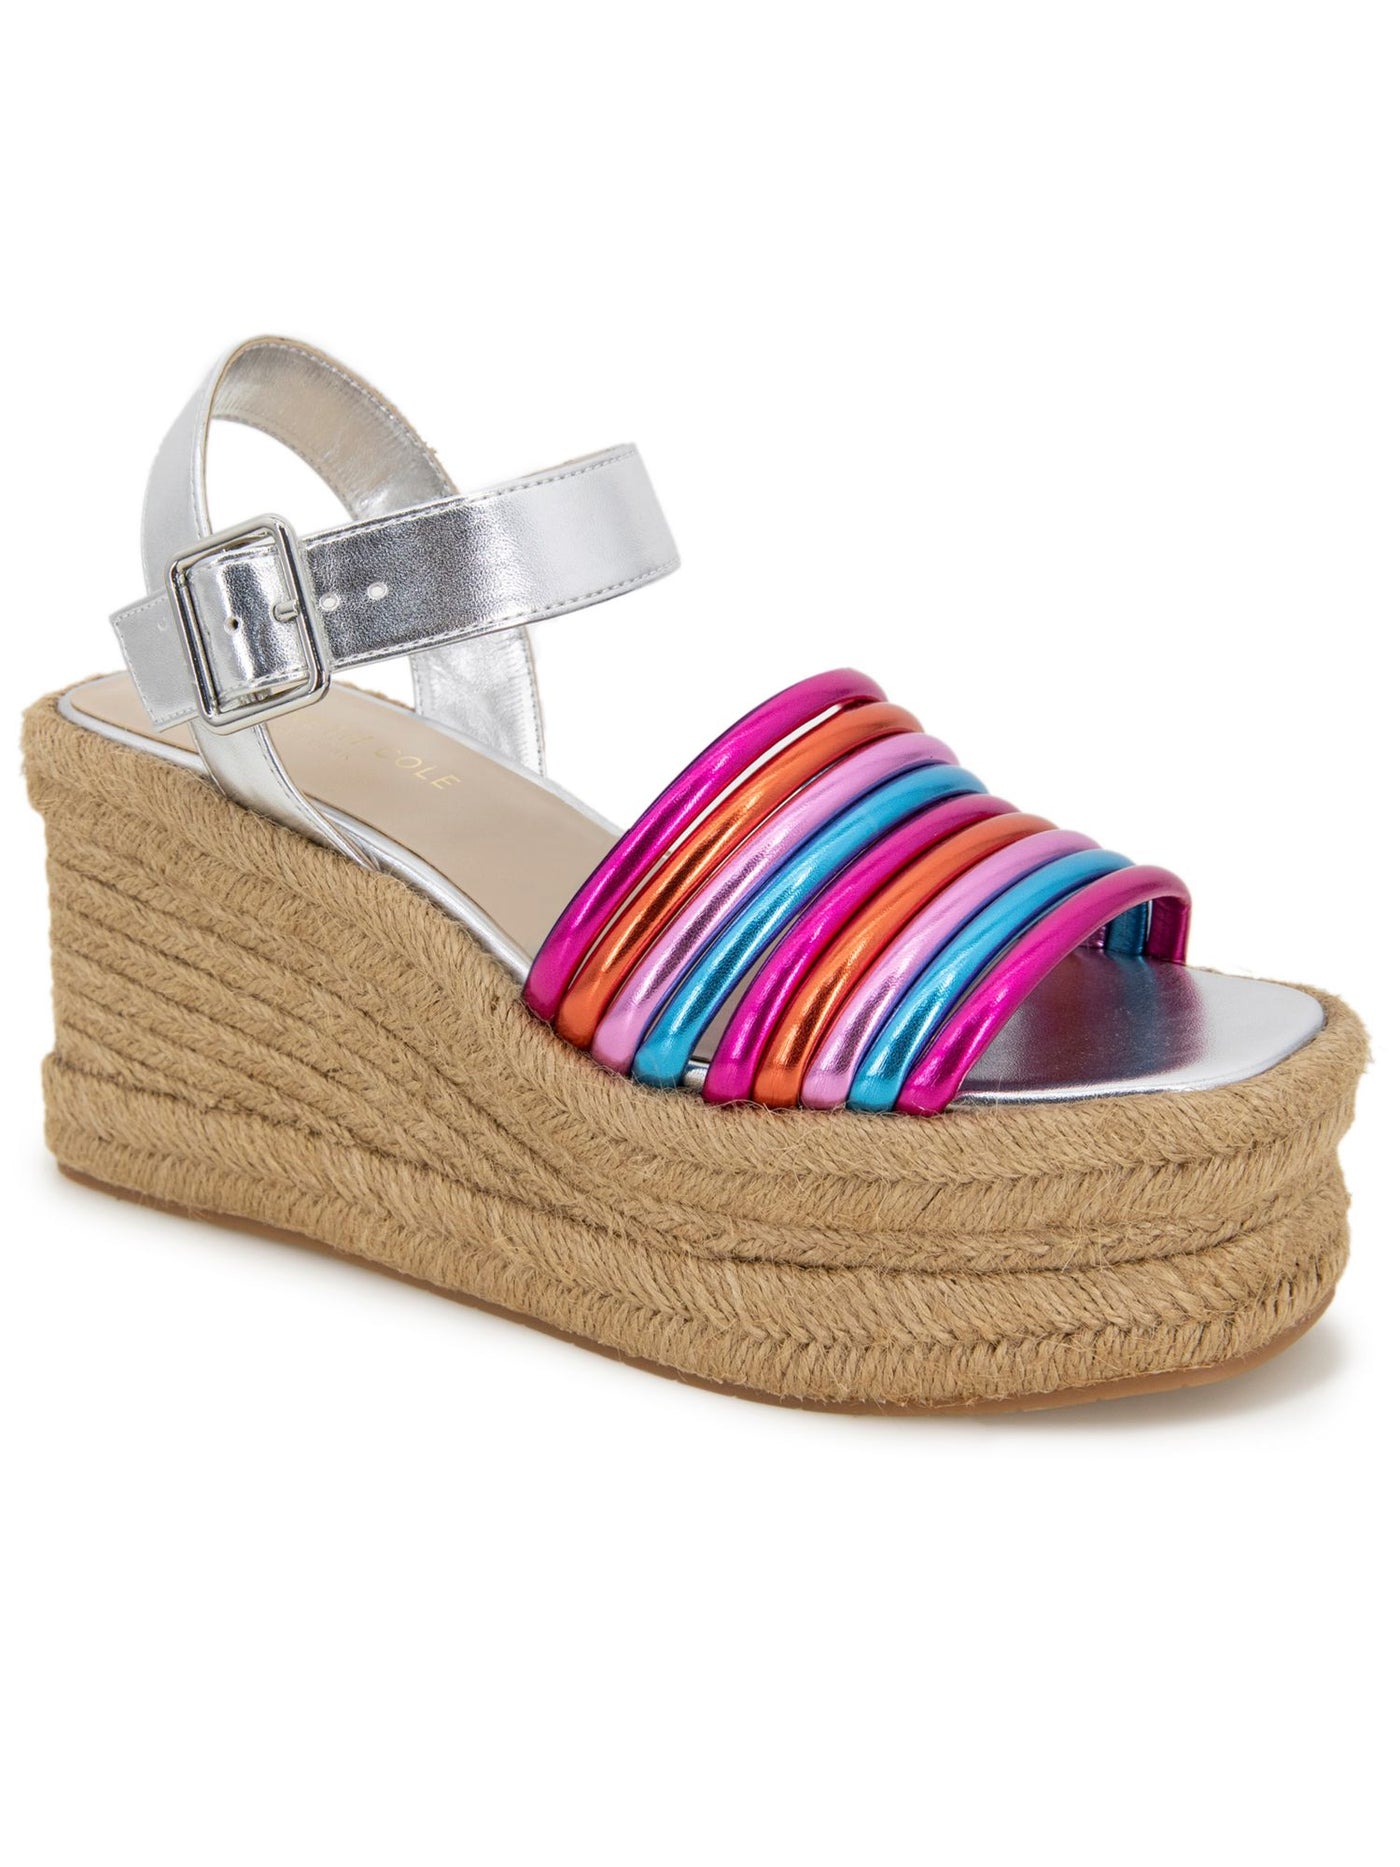 KENNETH COLE NEW YORK Womens Pink Colorblocked Stripe Espadrille Platform Cushioned Shelby Open Toe Wedge Buckle Espadrille Shoes 8.5